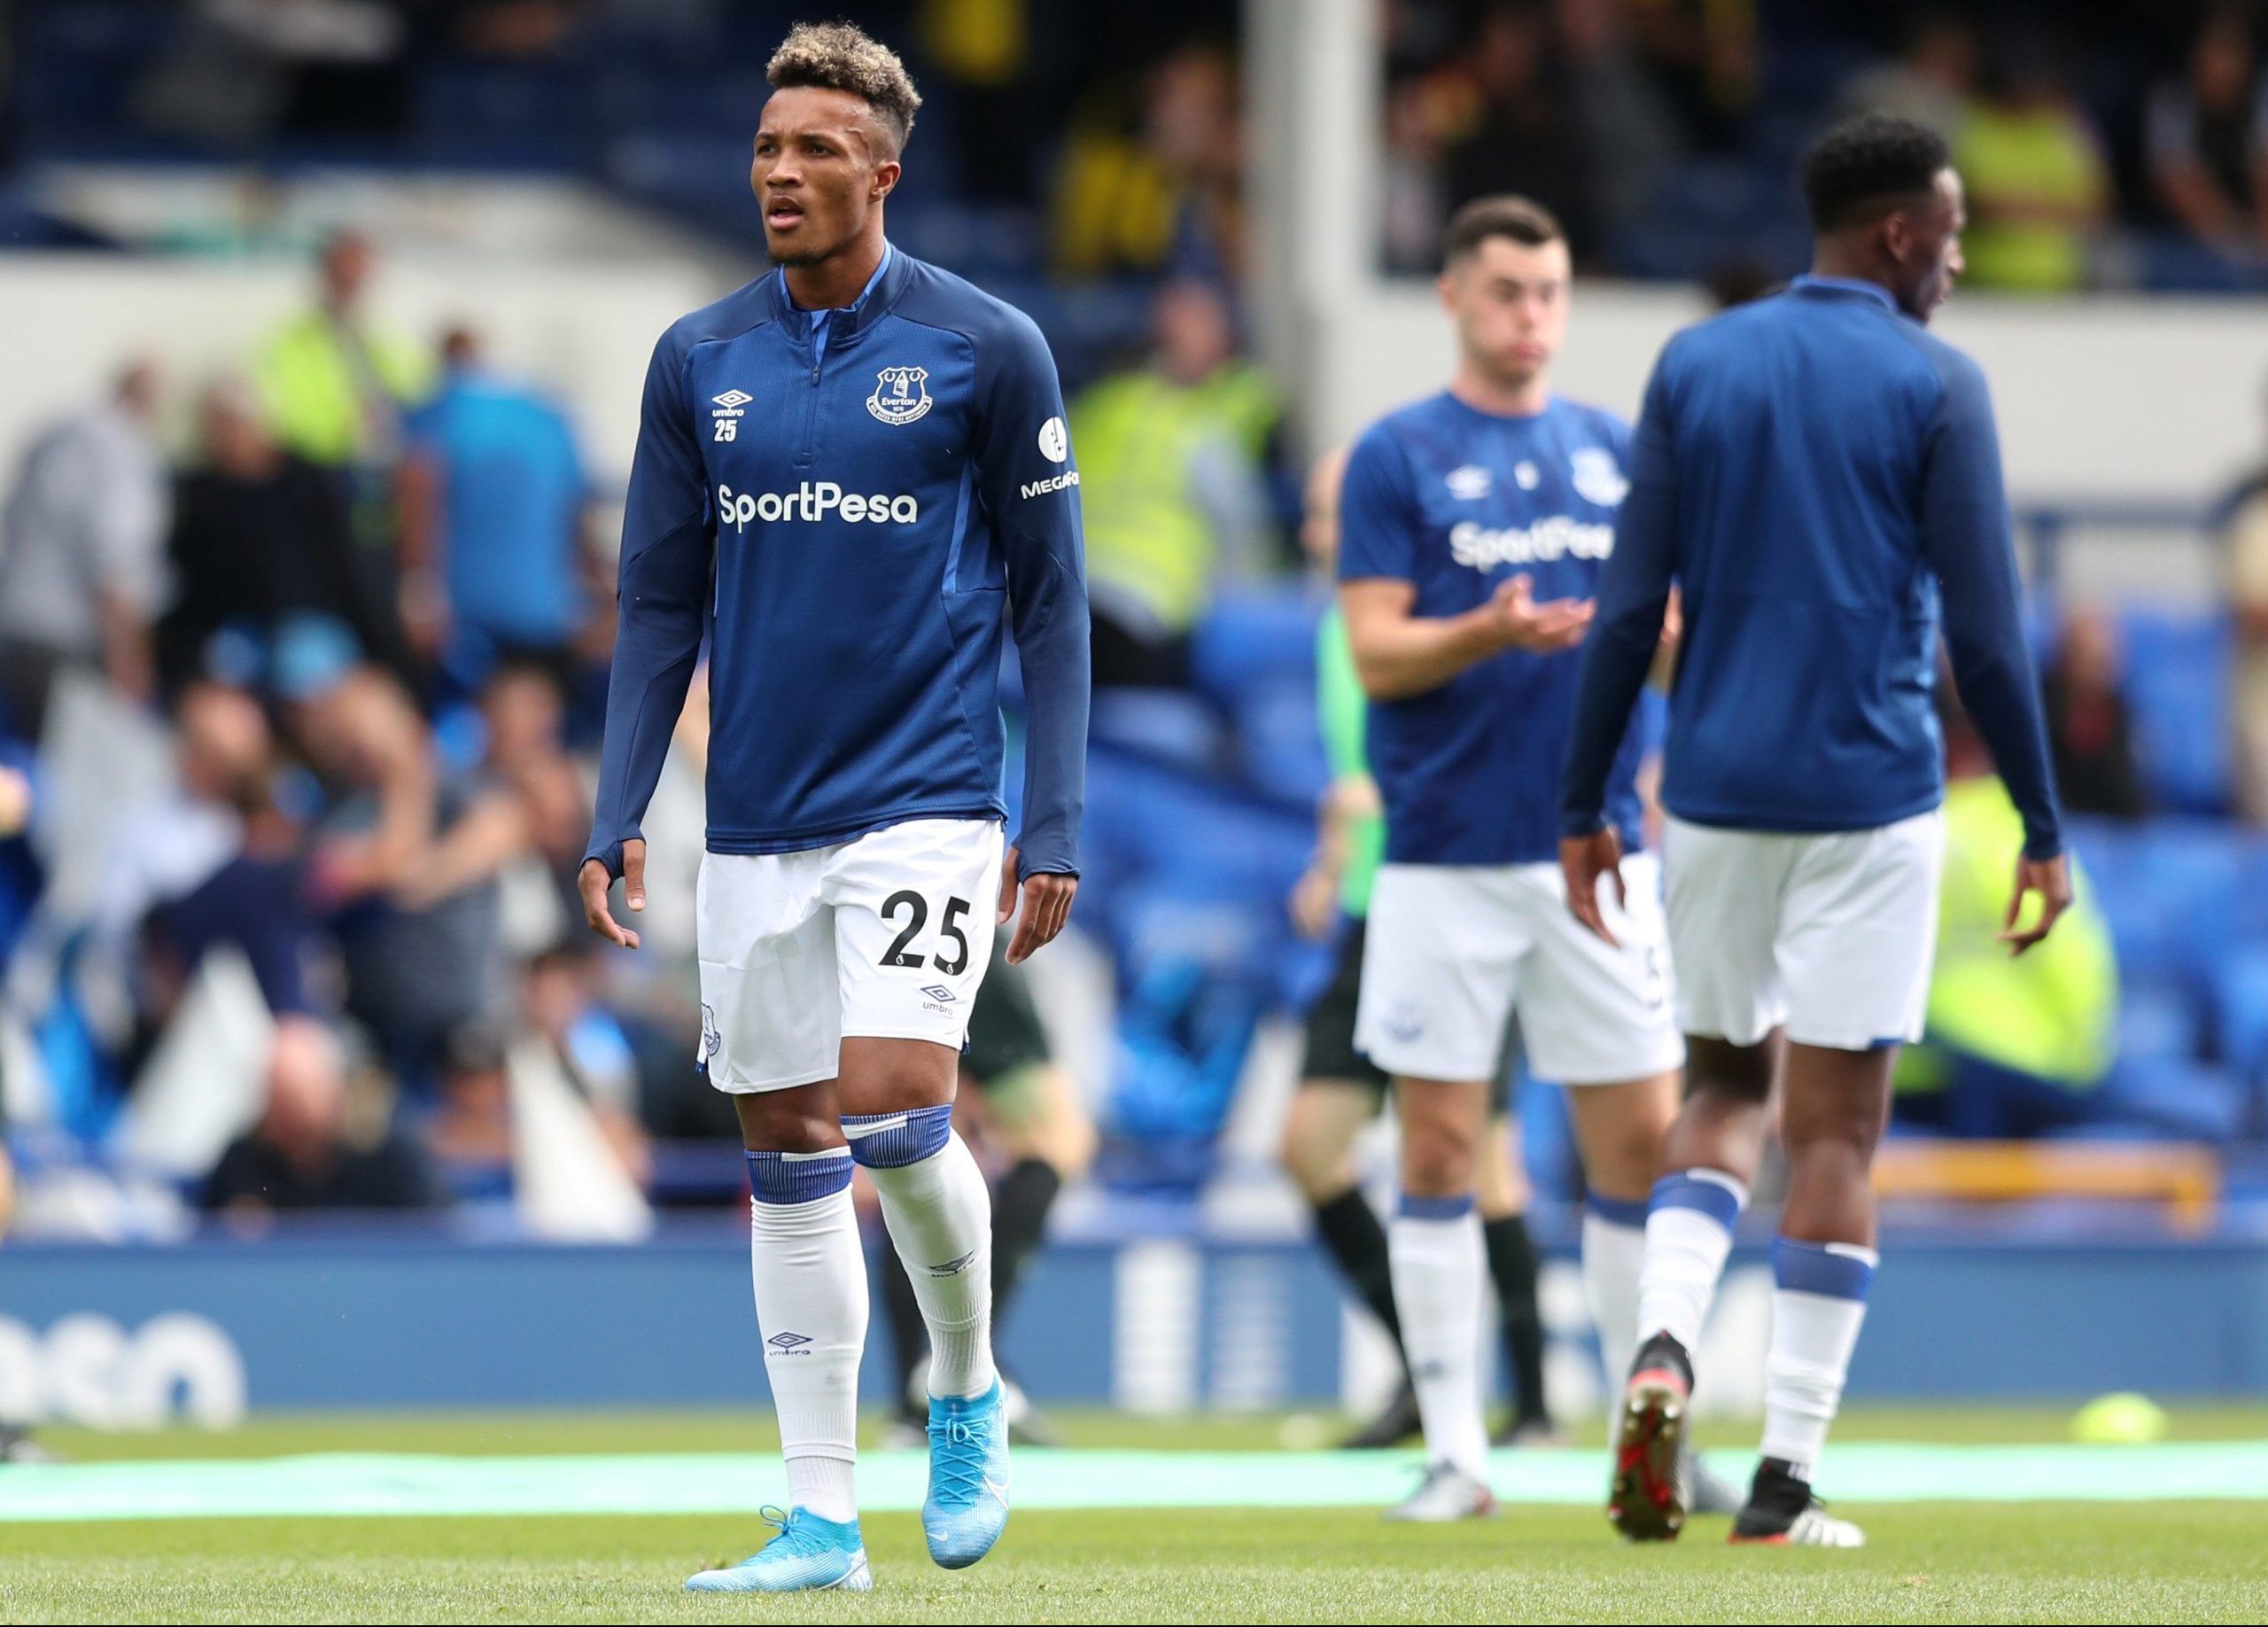 Soccer Football - Premier League - Everton v Watford - Goodison Park, Liverpool, Britain - August 17, 2019  Everton's Jean-Philippe Gbamin during the warm up before the match  REUTERS/Jon Super  EDITORIAL USE ONLY. No use with unauthorized audio, video, data, fixture lists, club/league logos or 